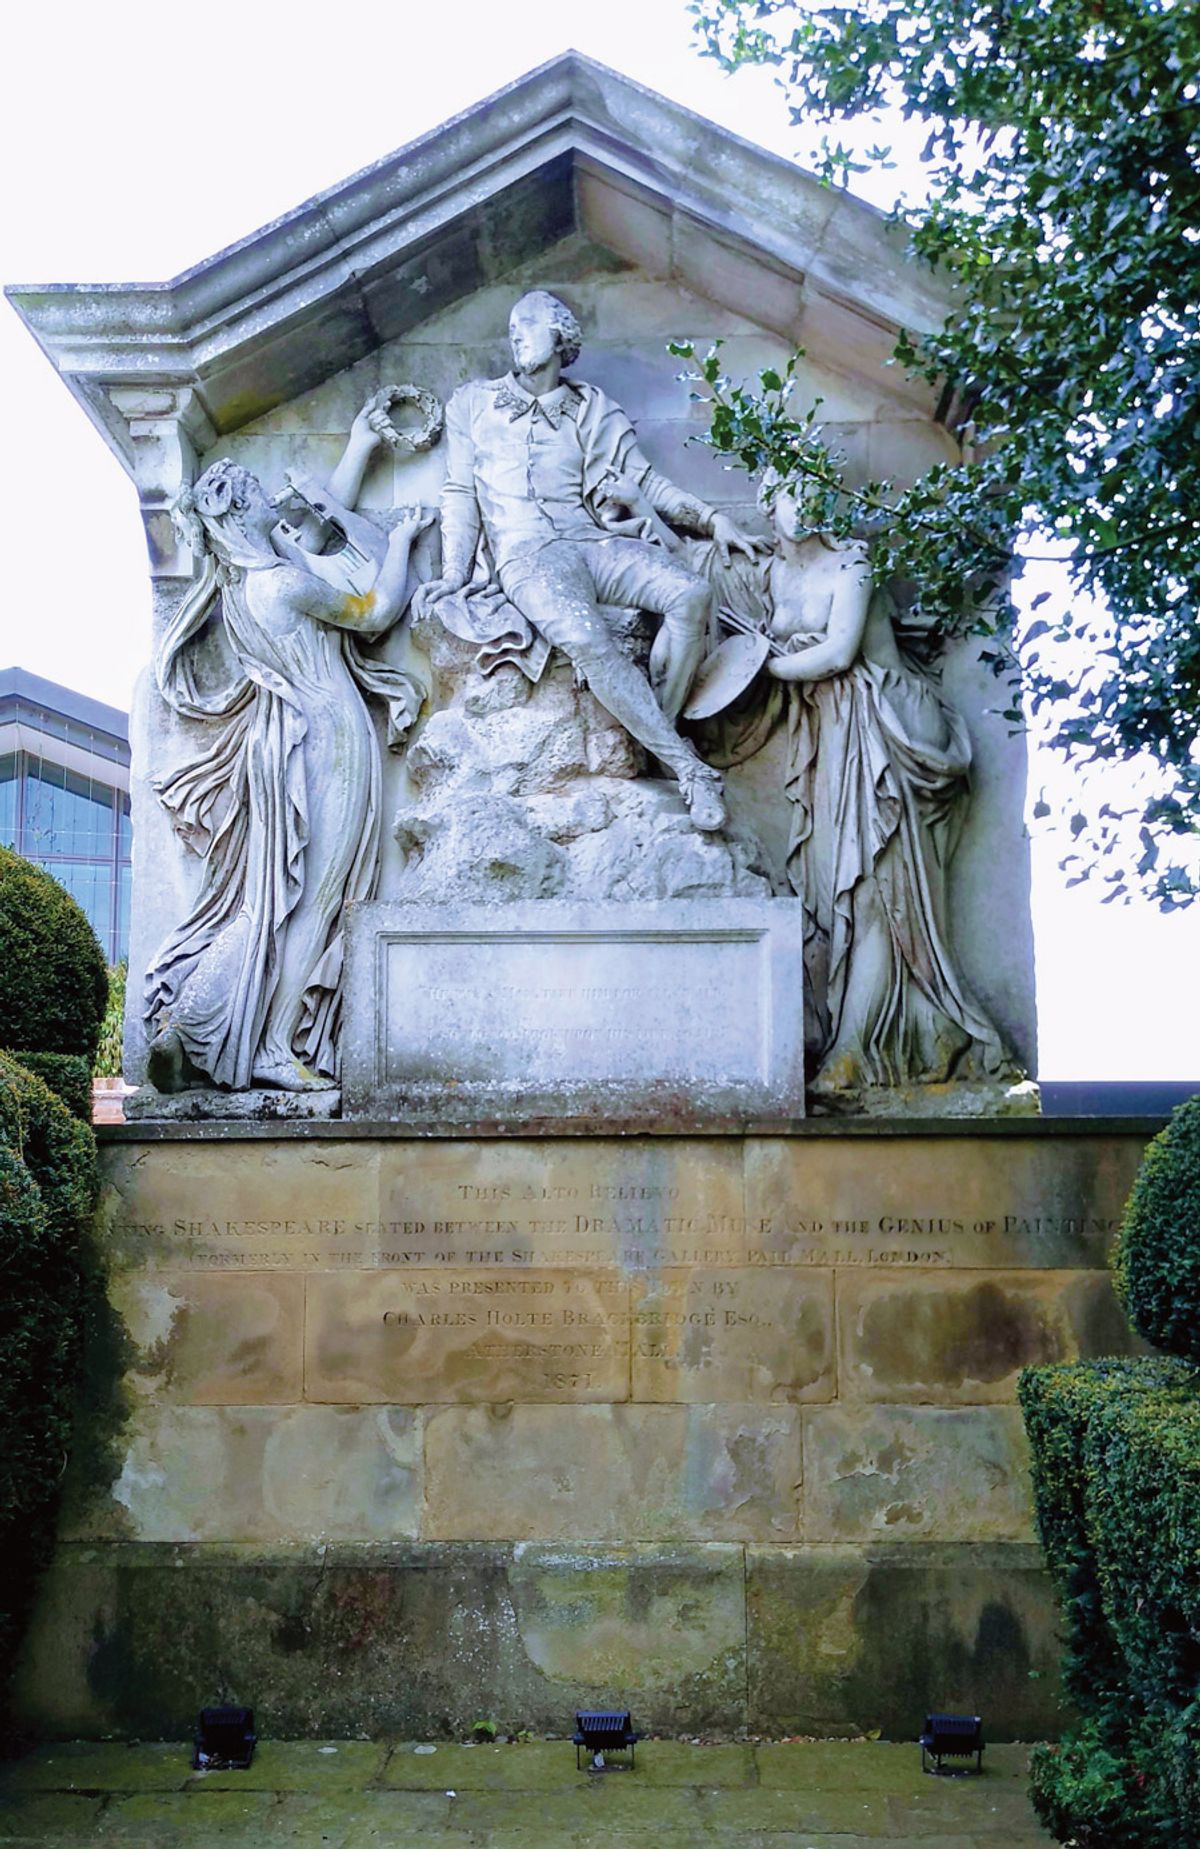 Thomas Banks’s 18th-century monument, which shows Shakespeare flanked by the Dramatic Muse and the Genius of Painting, was originally created for the Shakespeare Gallery in London, which housed works by artists including Angelica Kauffman and Joshua Reynolds Courtesy of the Shakespeare Birthplace Trust